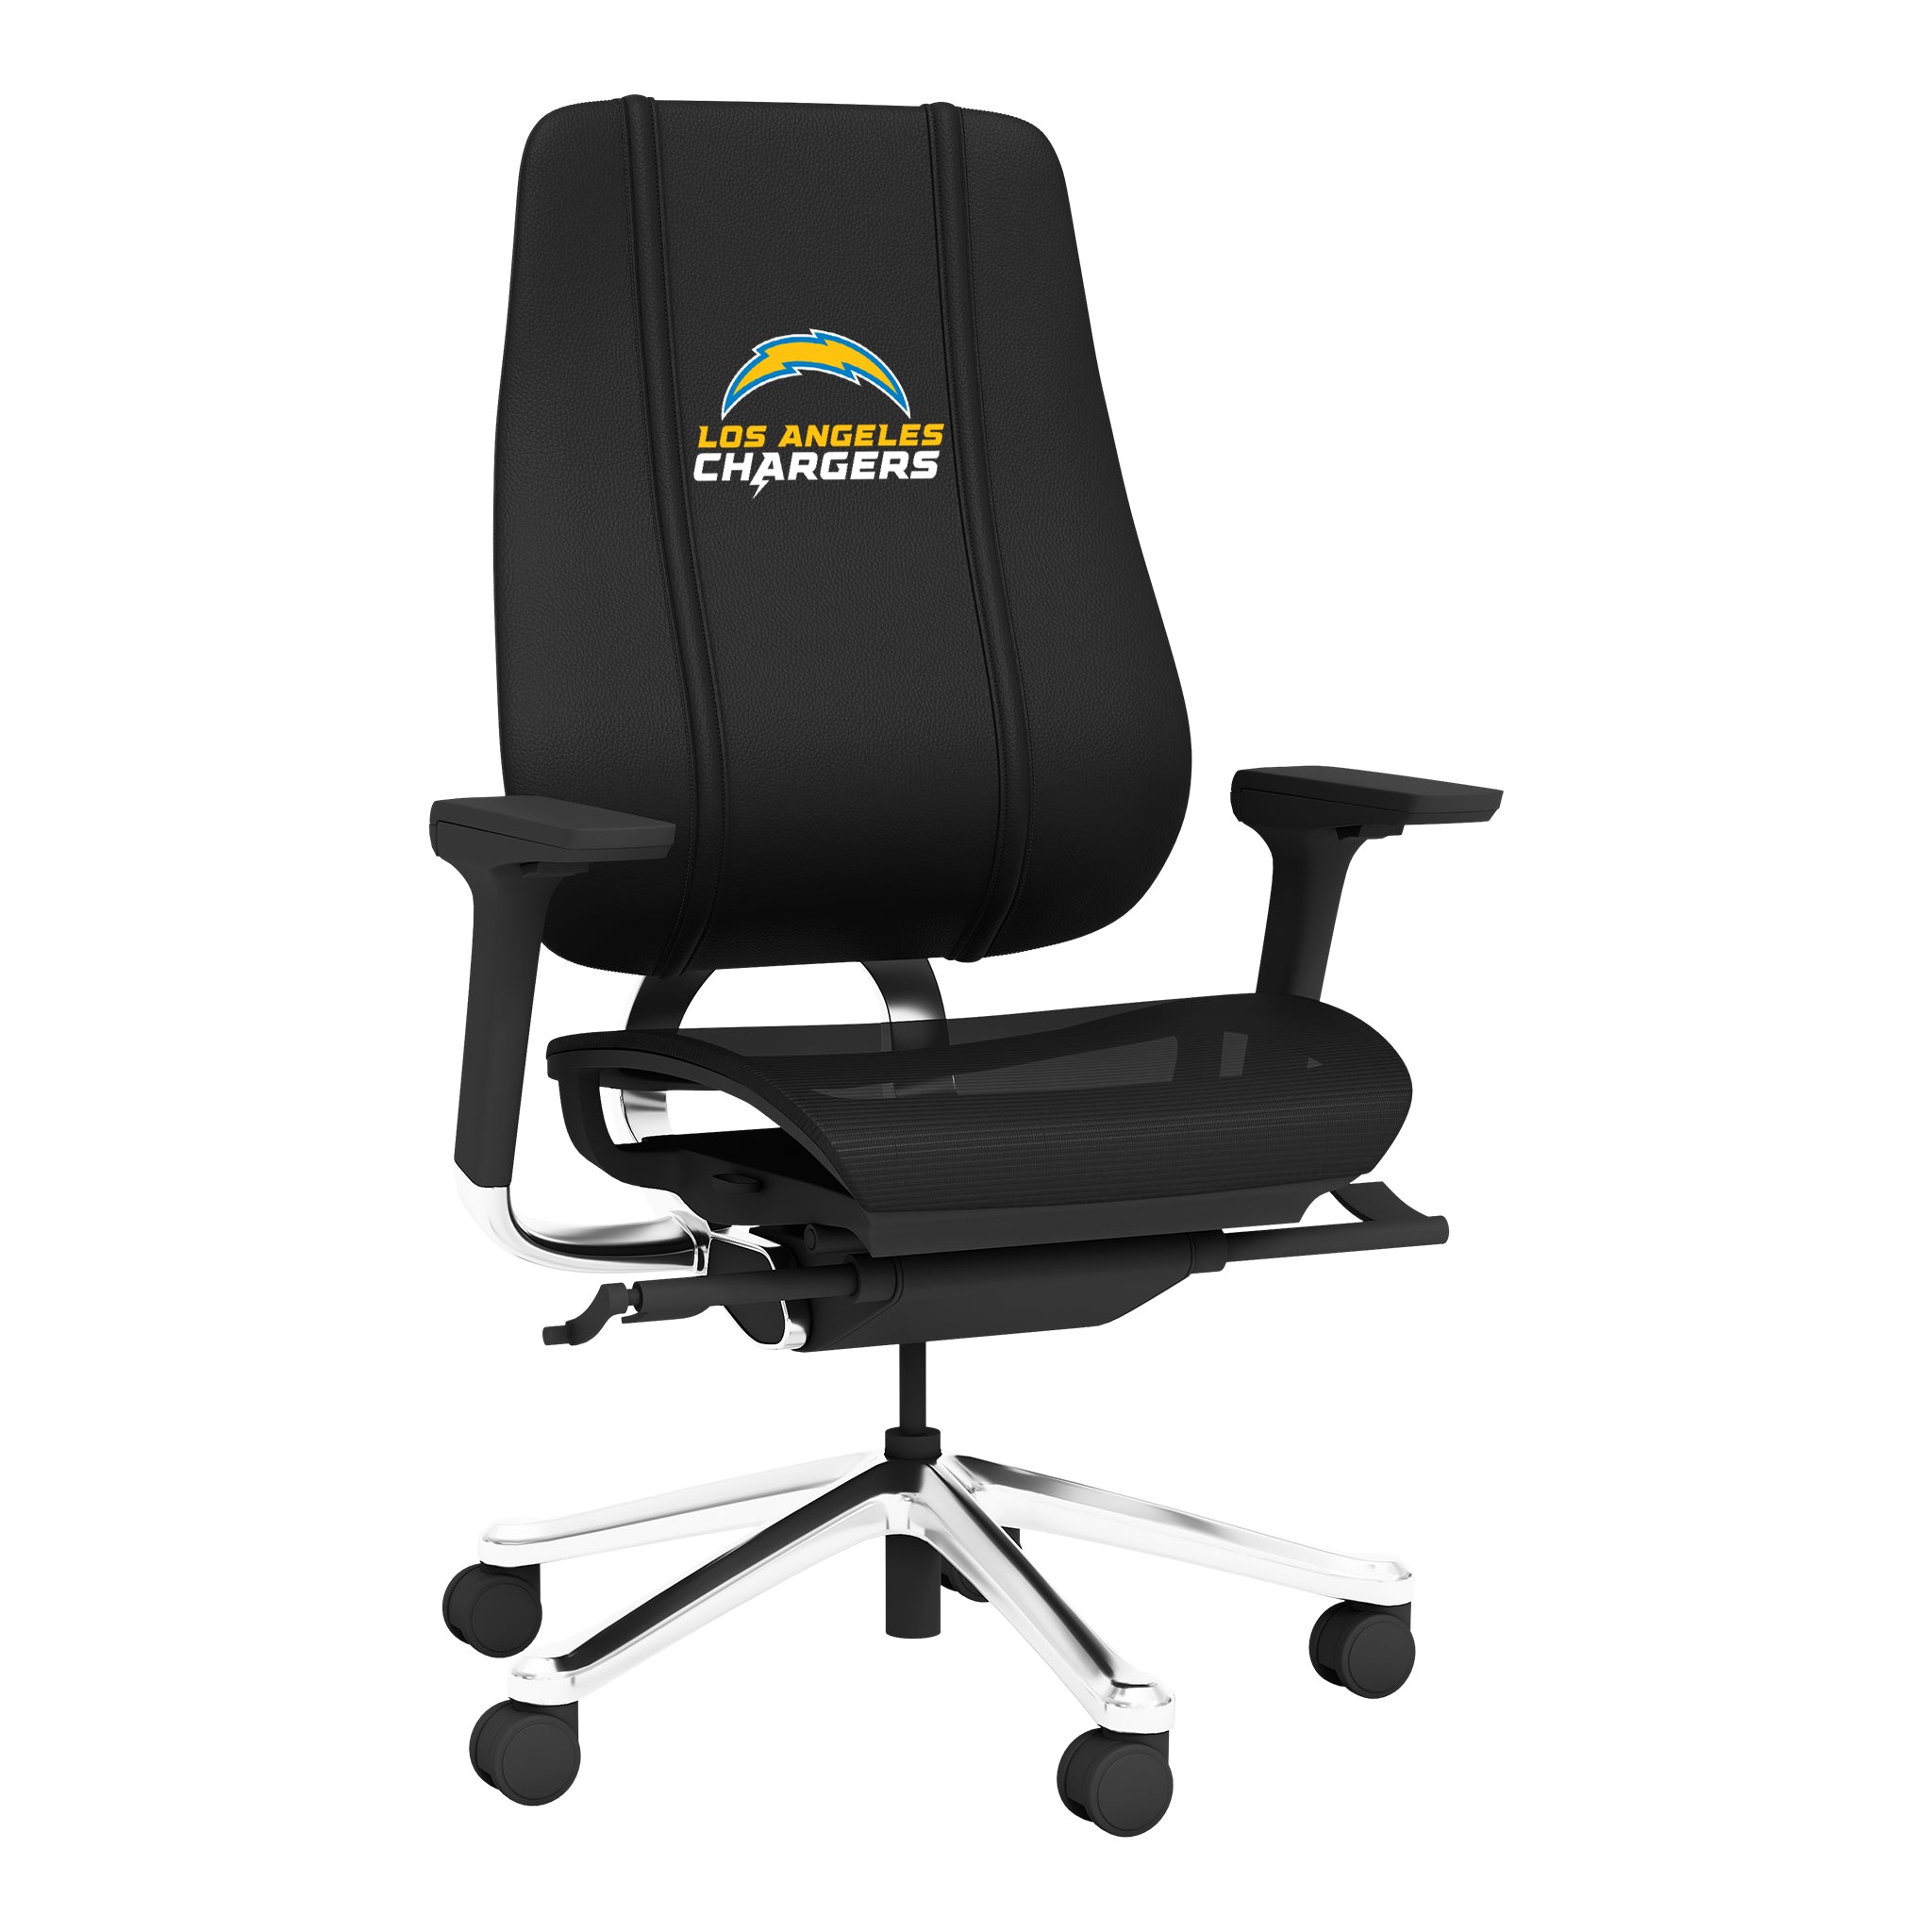 Los Angeles Chargers PhantomX Chair - Office - Home